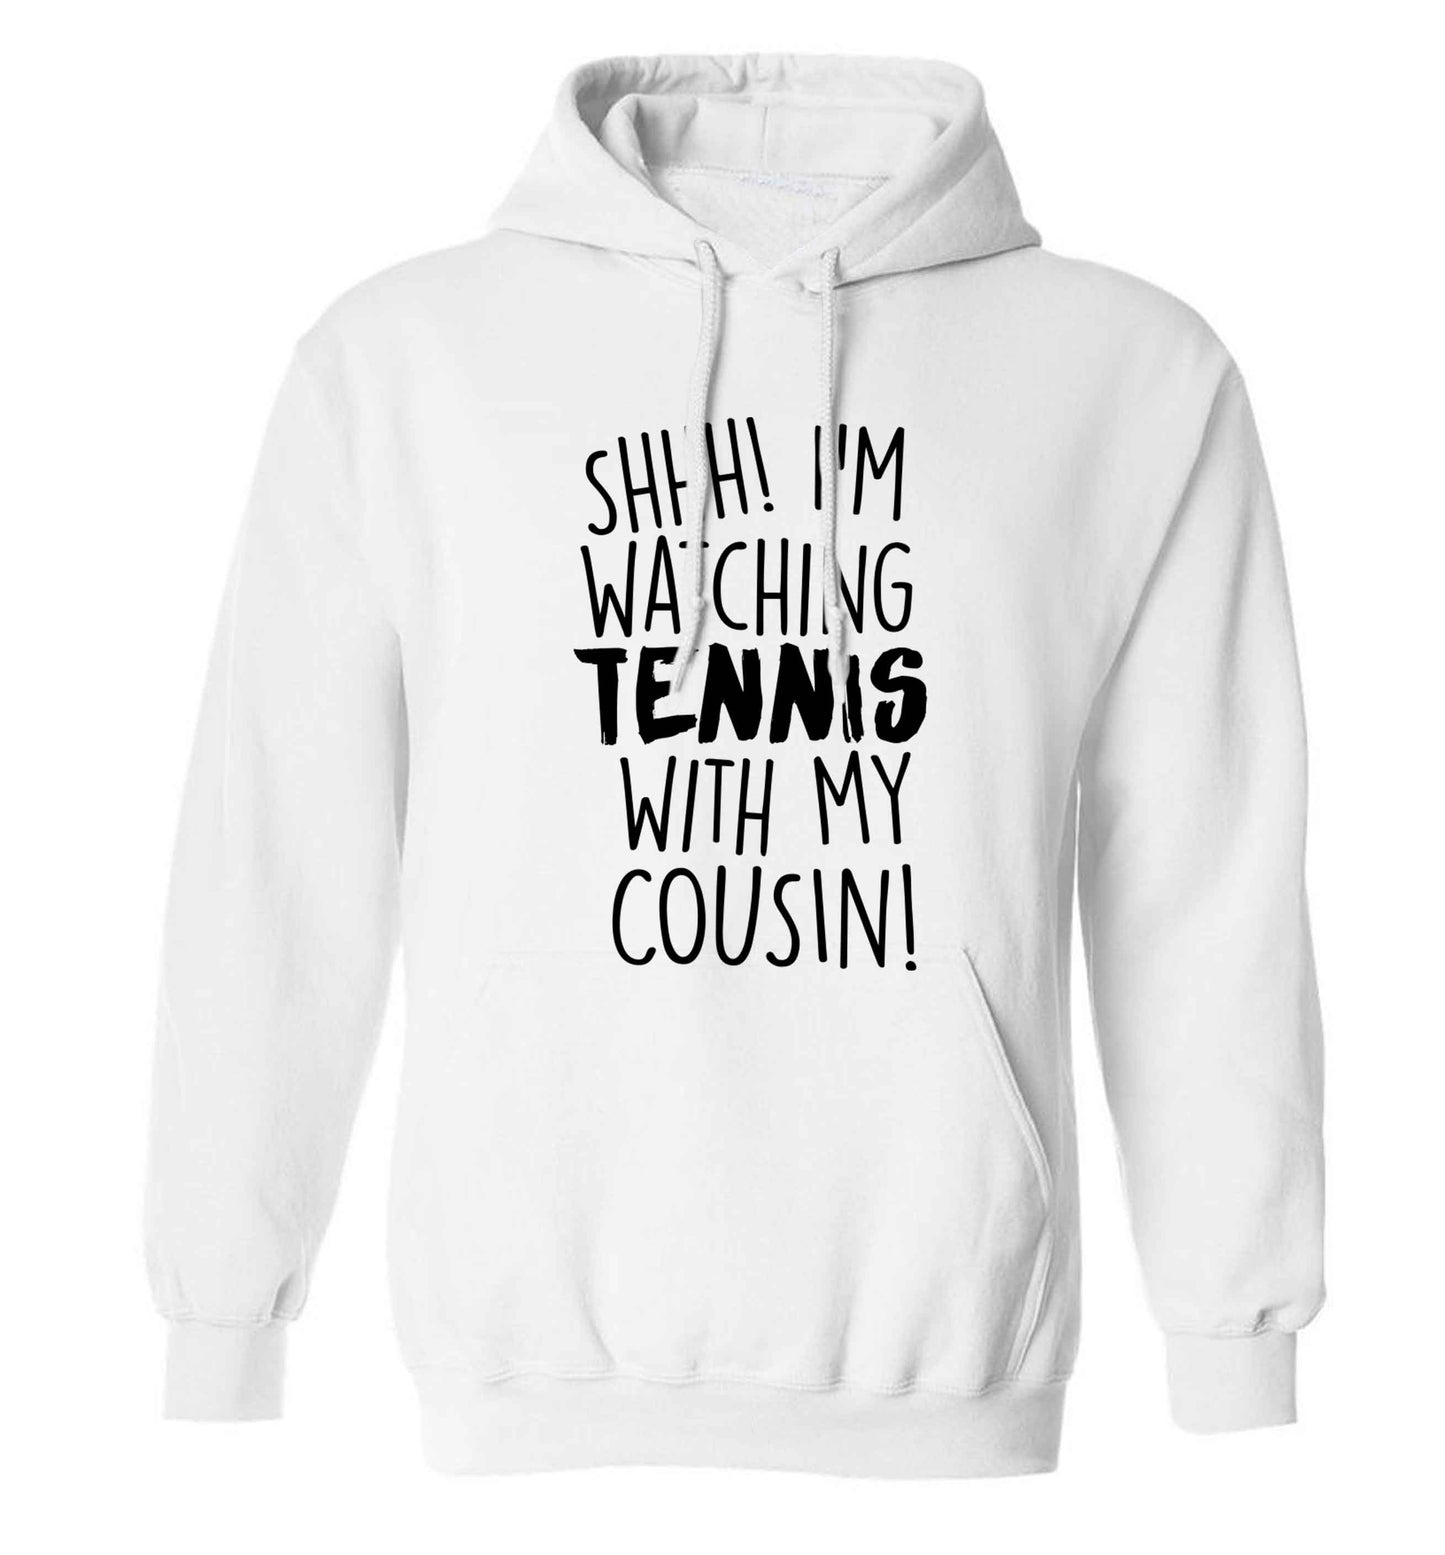 Shh! I'm watching tennis with my cousin! adults unisex white hoodie 2XL